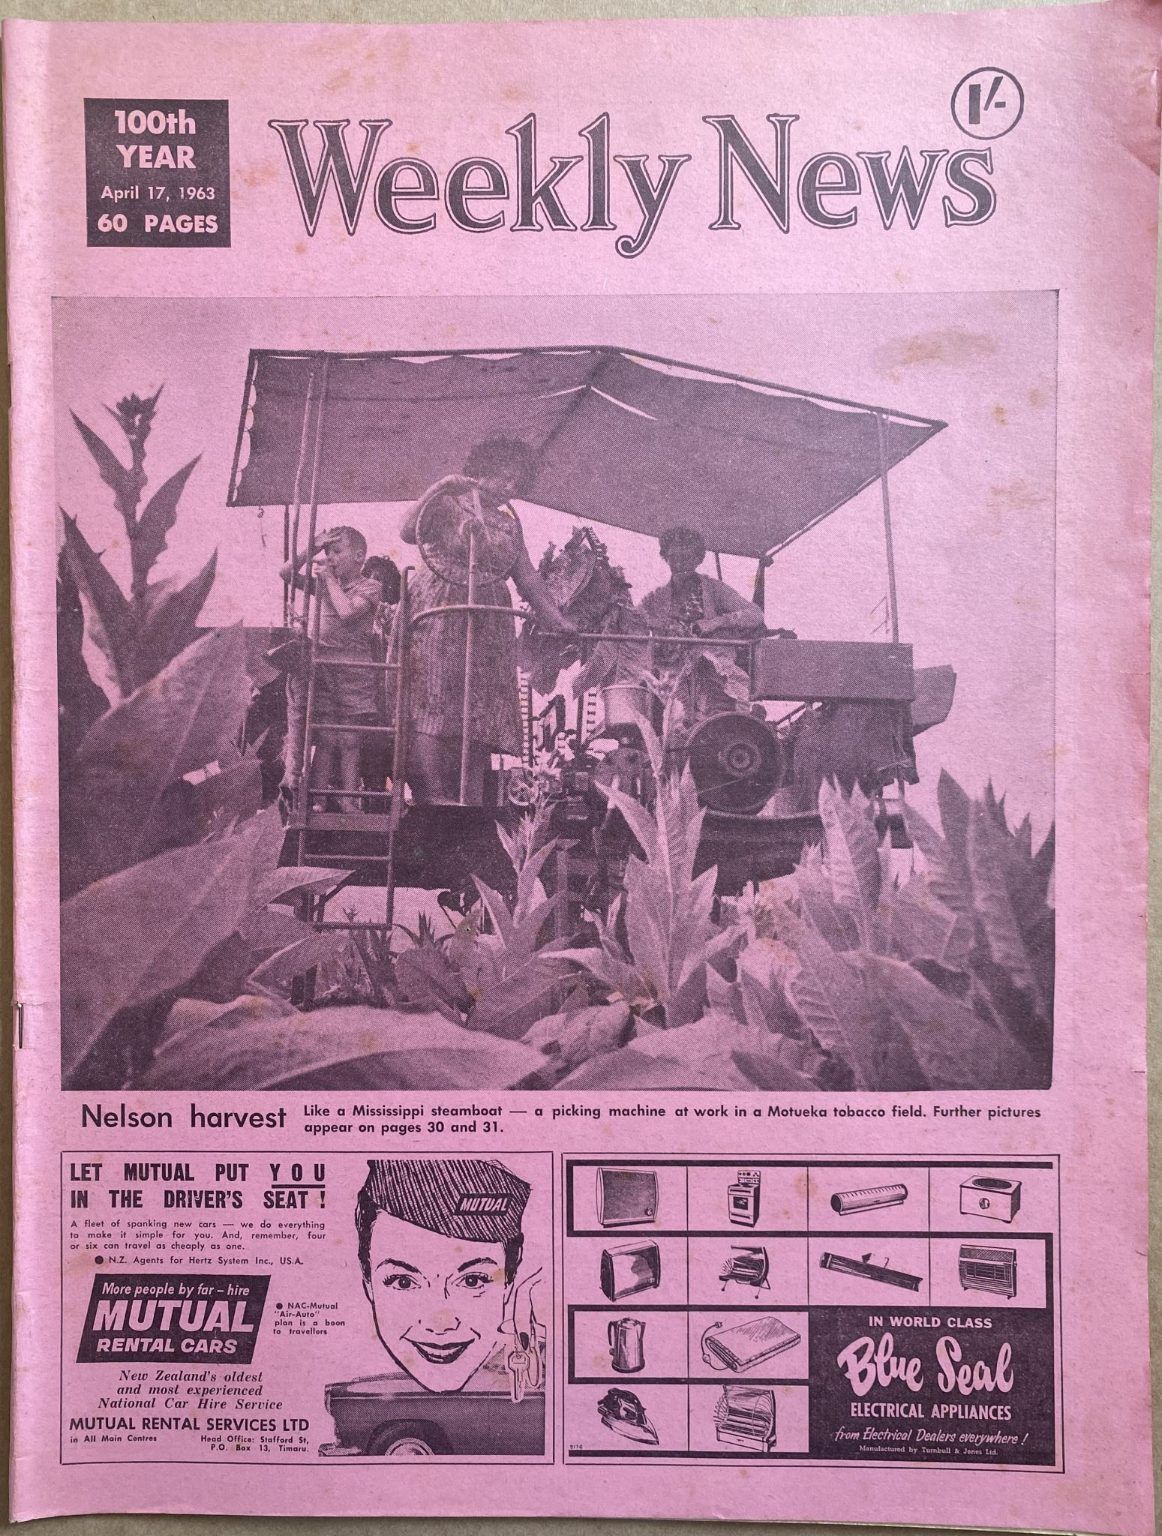 OLD NEWSPAPER: The Weekly News, No. 5186, 17 April 1963